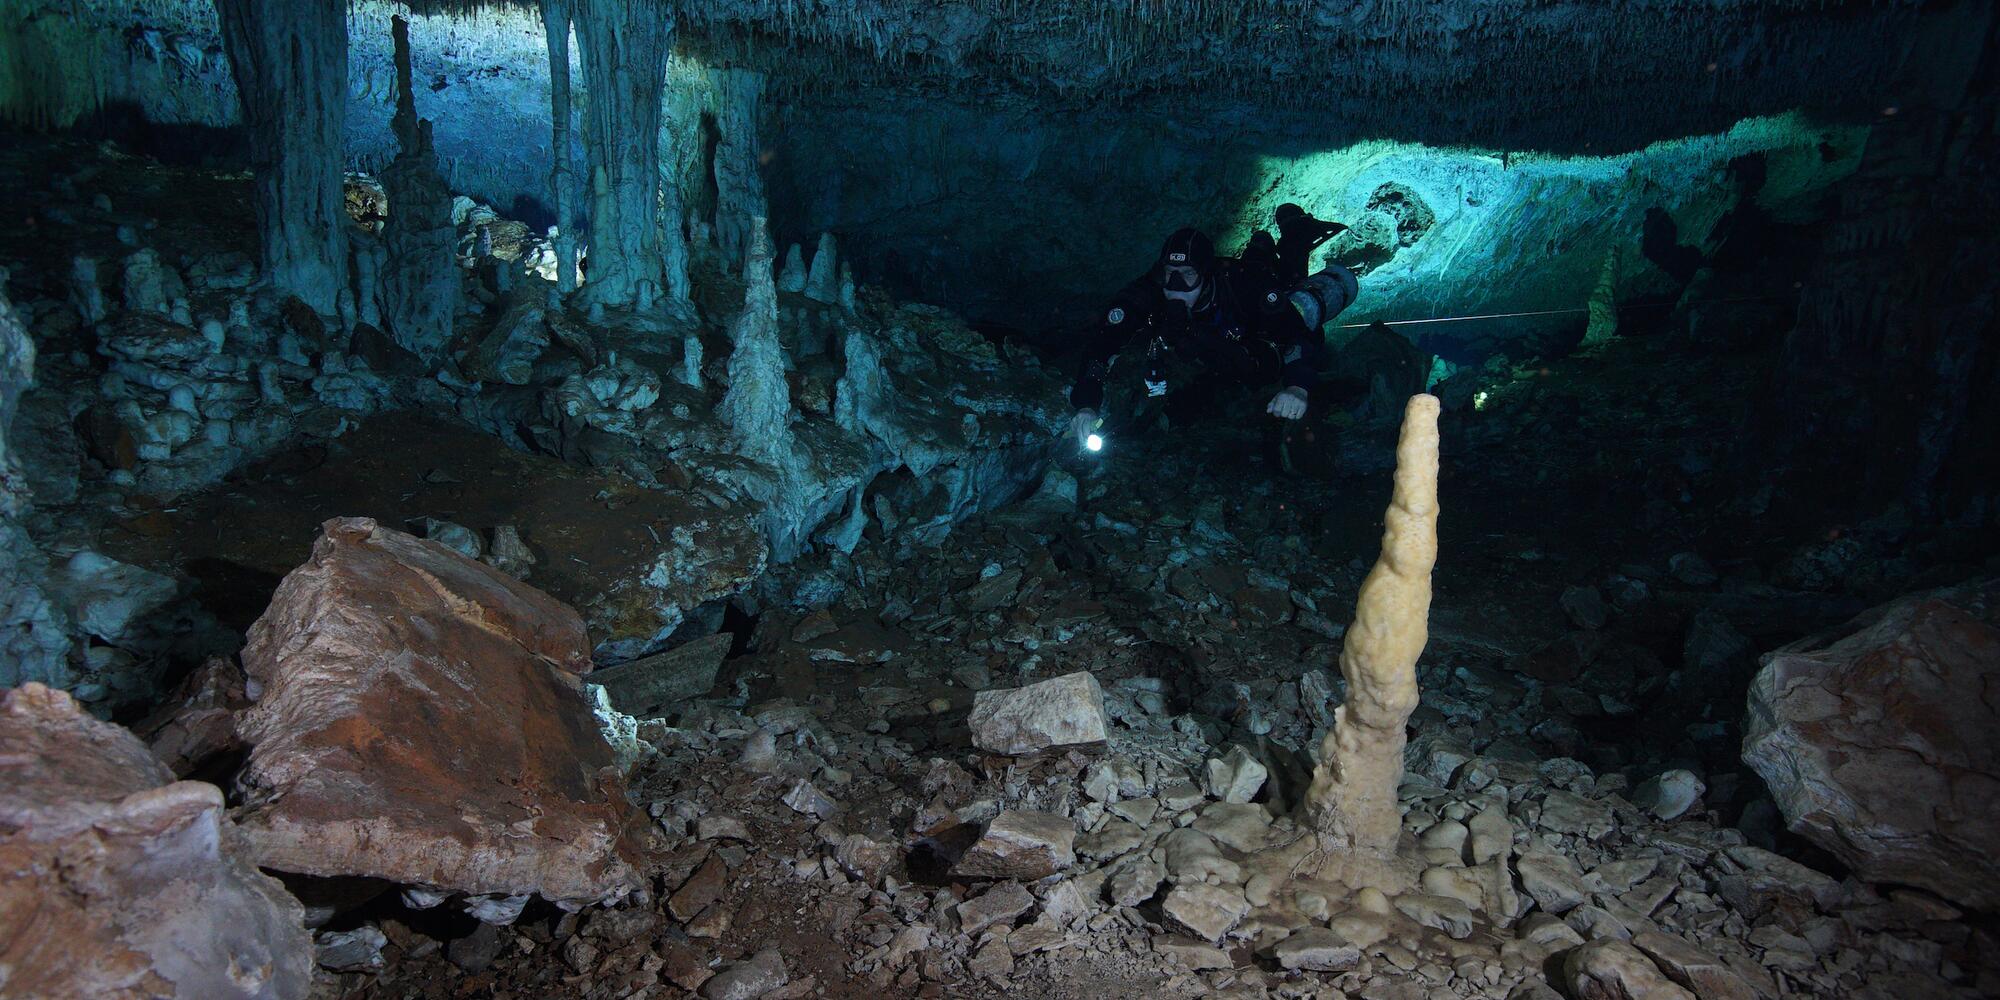 Image of underwater cave beneath the Yucutan Peninsula. A diver with a flashlight is seen in the cave.